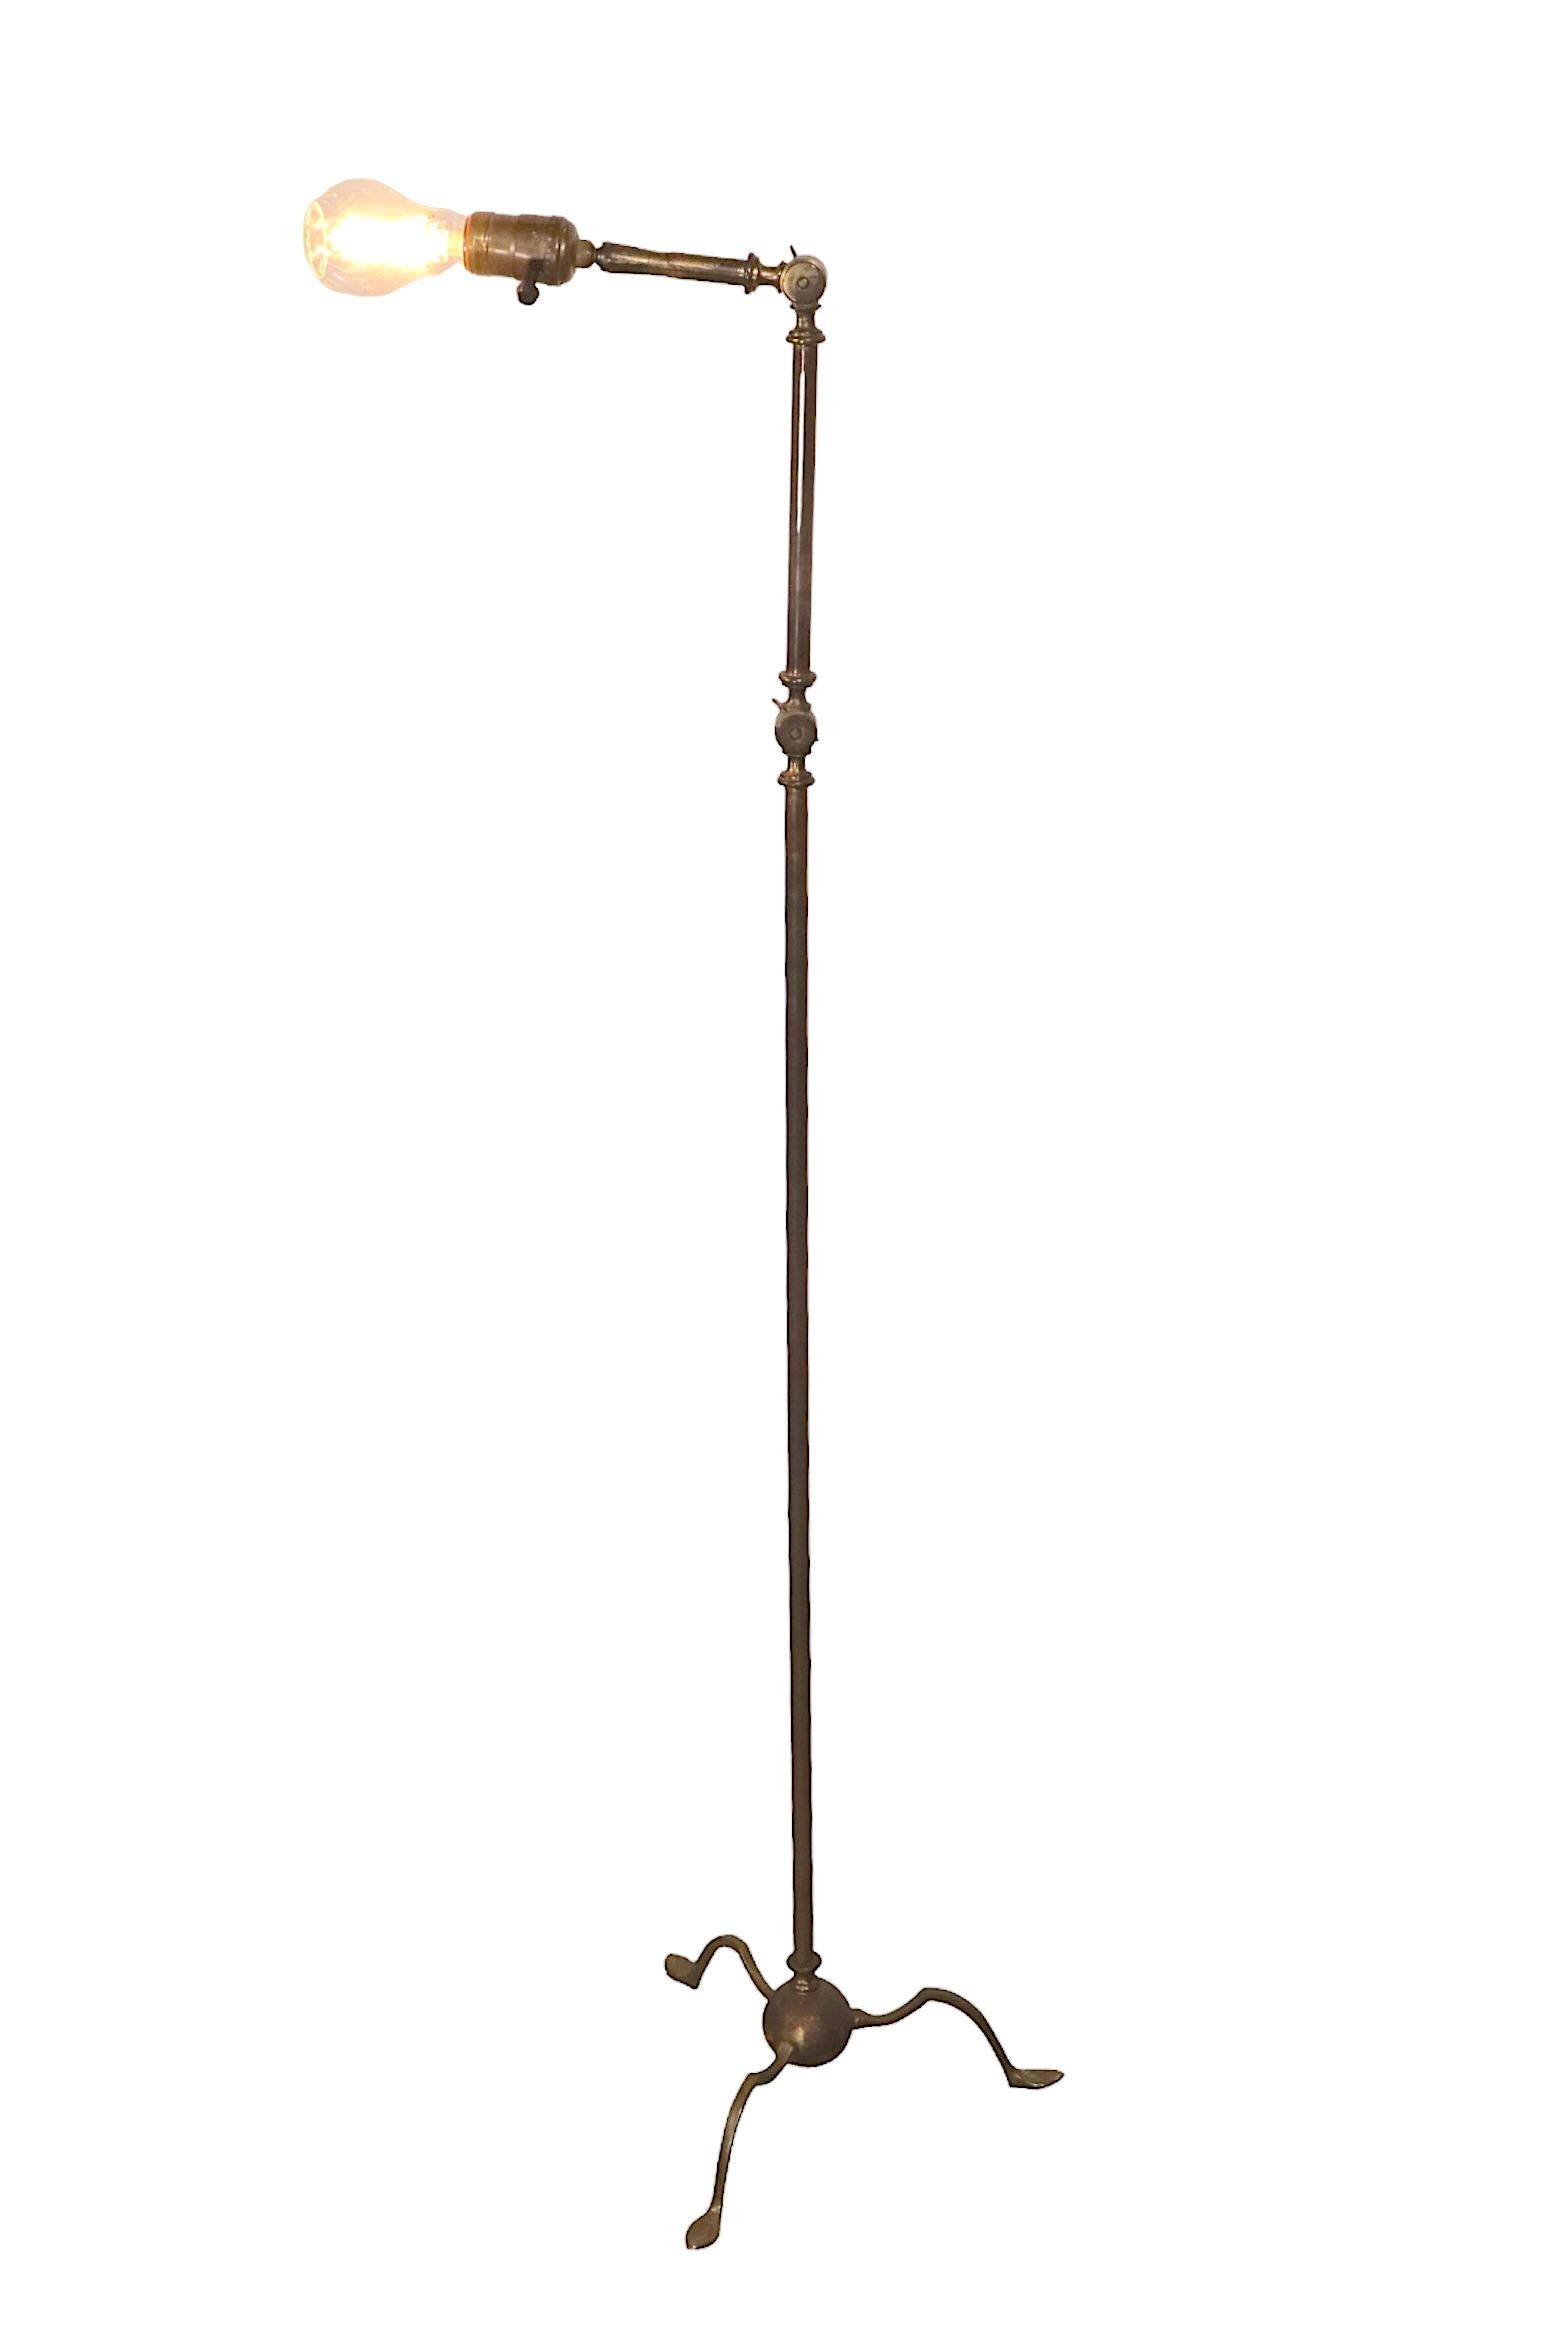 Articulating Brass Reading Floor Lamp in the Classical Style, C. 1900- 1930's For Sale 1